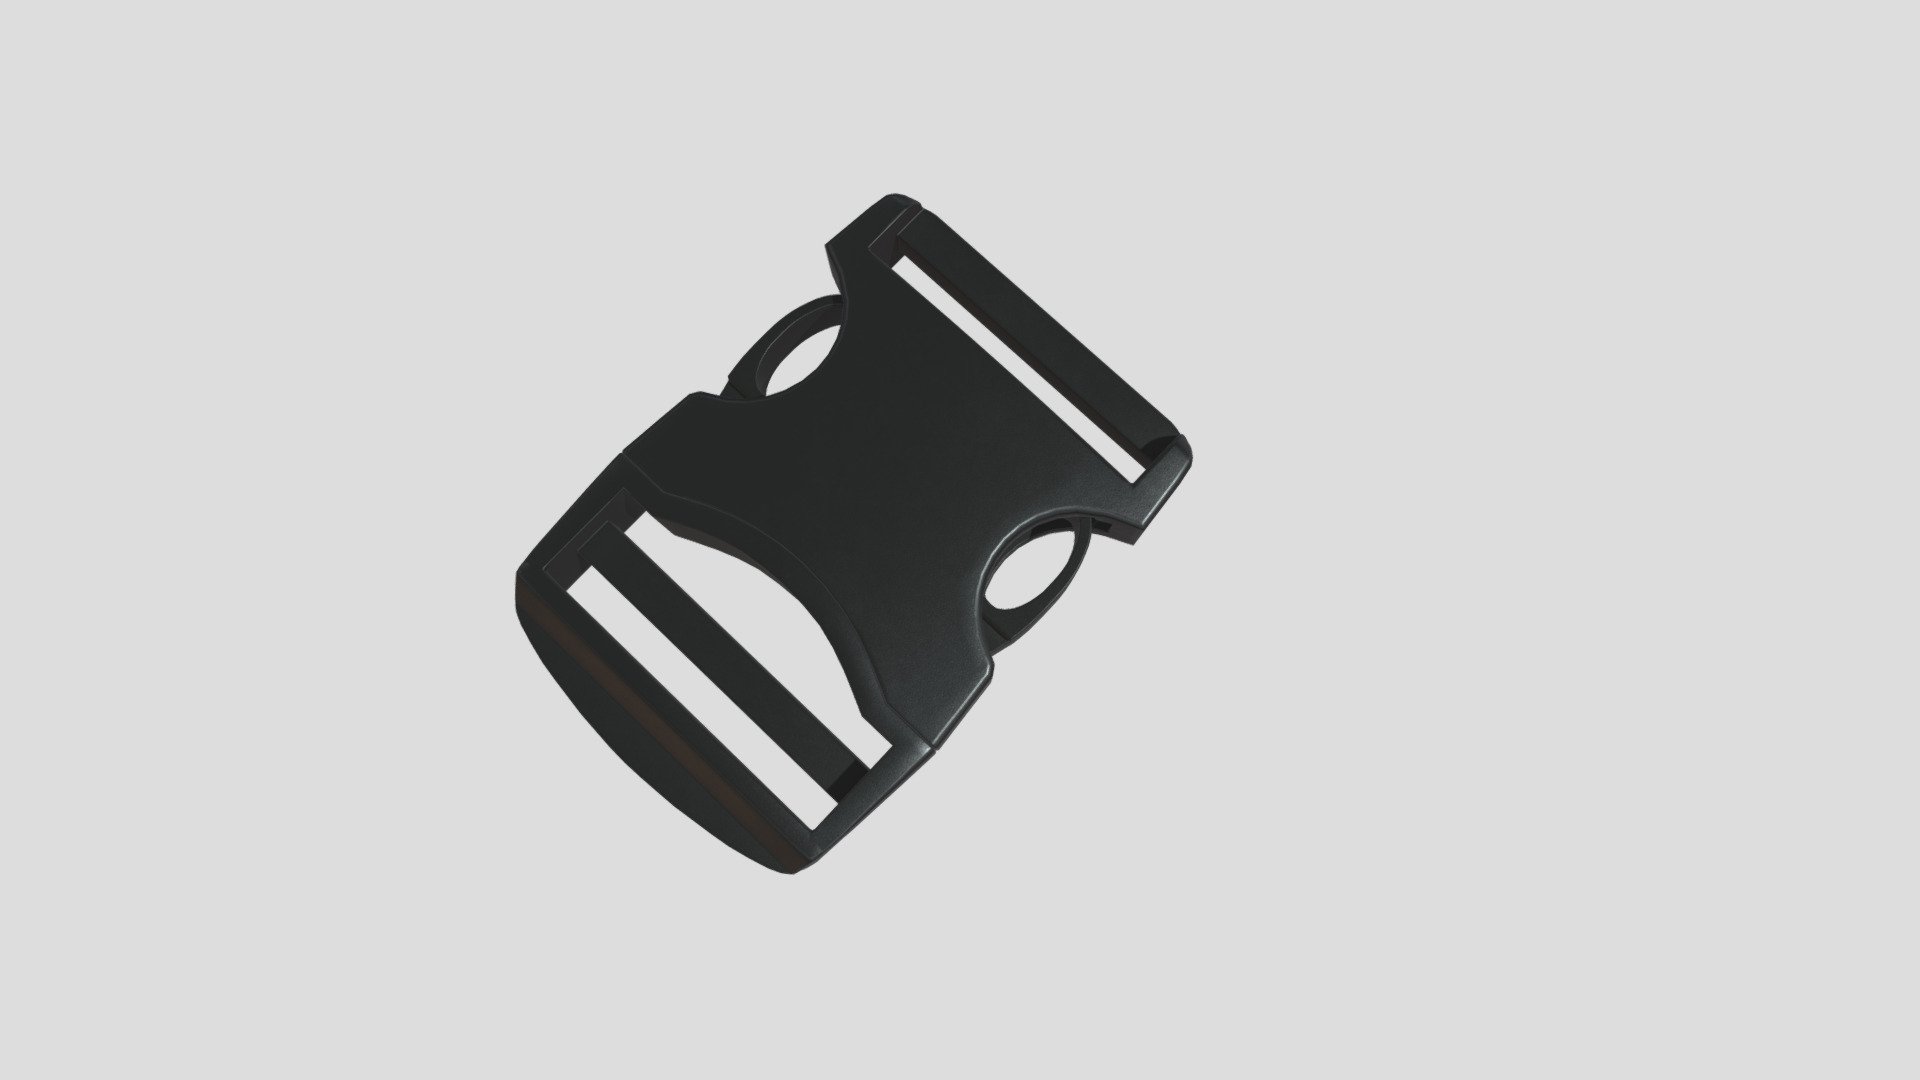 Plastic Buckle Sam C Type.

The file includes a 3D model and 4k PBR textures in png format, FBX and Obj files.

The model was created in 3ds mas 2021 with the render engine V-Ray 5.0

You can request a different format.

Textures

PBR textures 4096x4096 pixels

each material contains




BasicColor.

AO.

Roughness.

Normal.

Metalness.

Opacity.

Emissive.

Have a nice day! - Plastic buckle - Buy Royalty Free 3D model by hado (@hado3d) 3d model